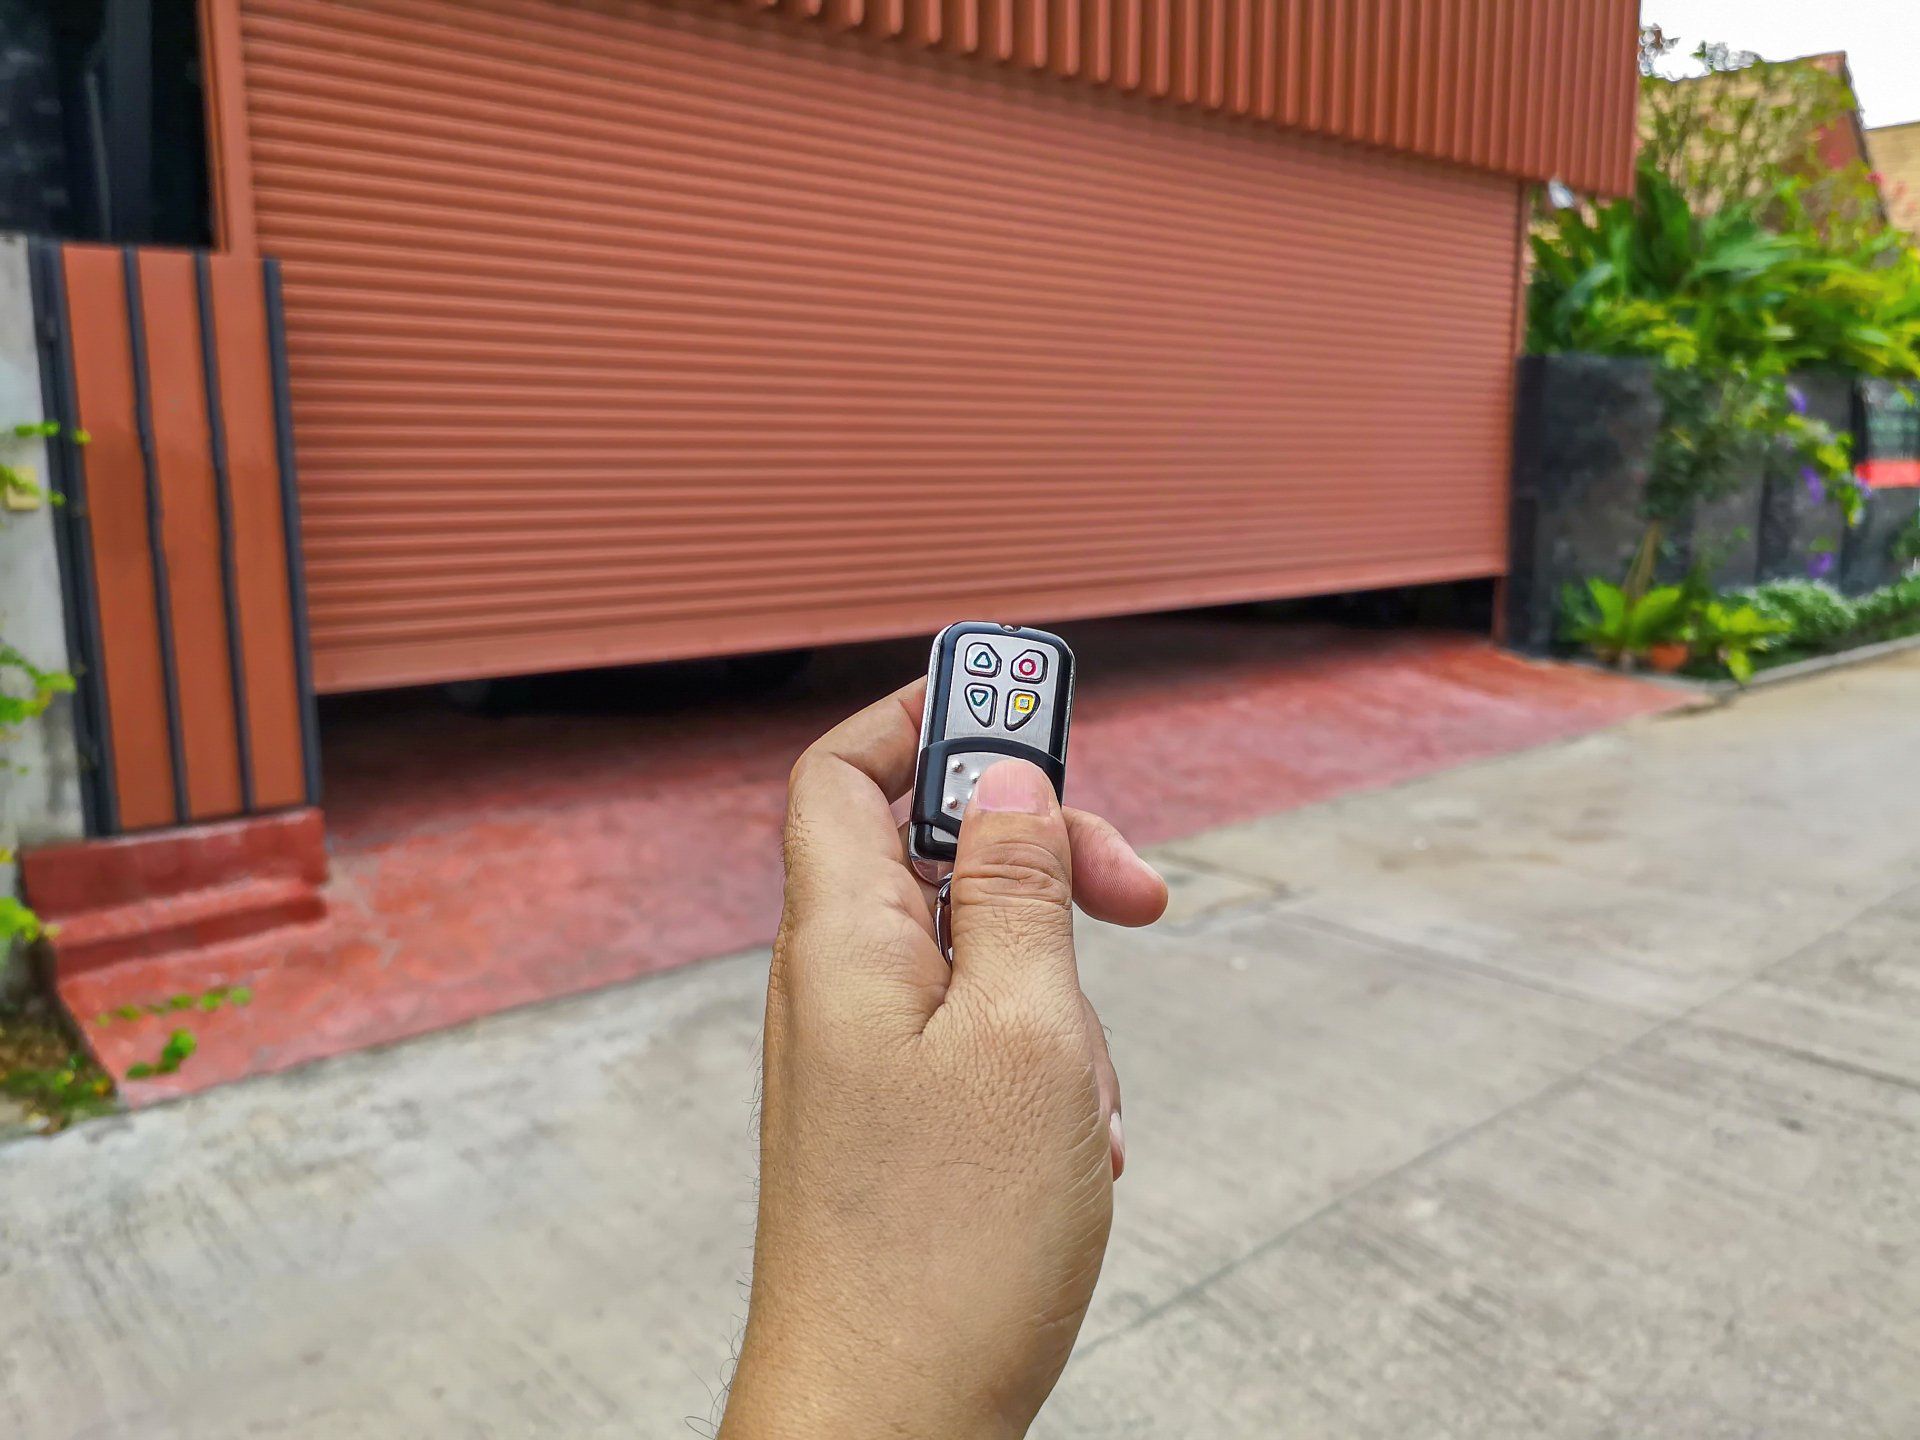 a person is holding a remote control in front of a garage door .